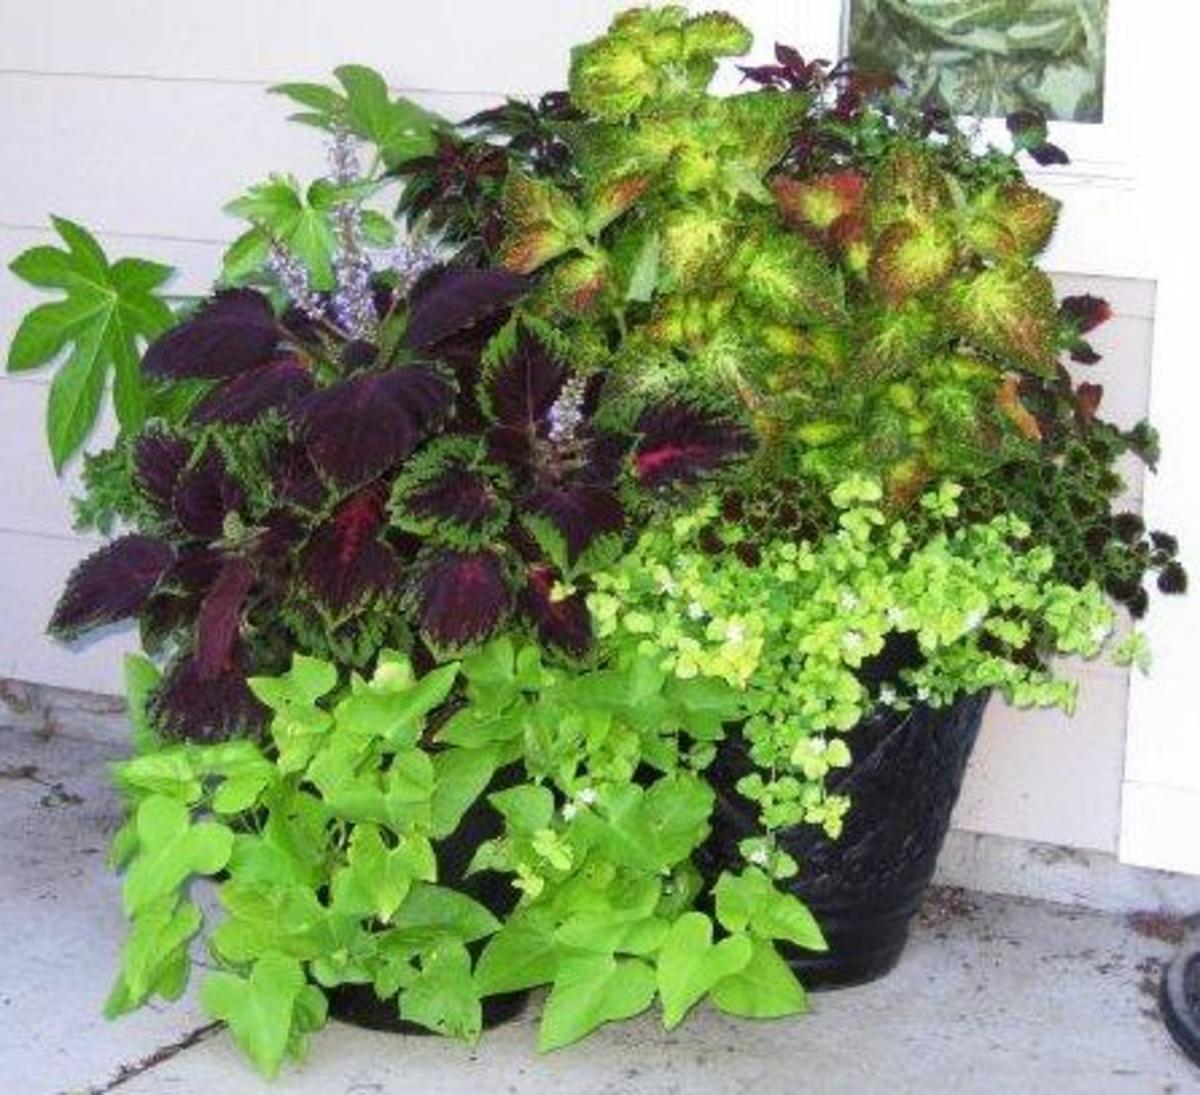 Choose soft-leaved plants for the "touch" aspect of the garden.